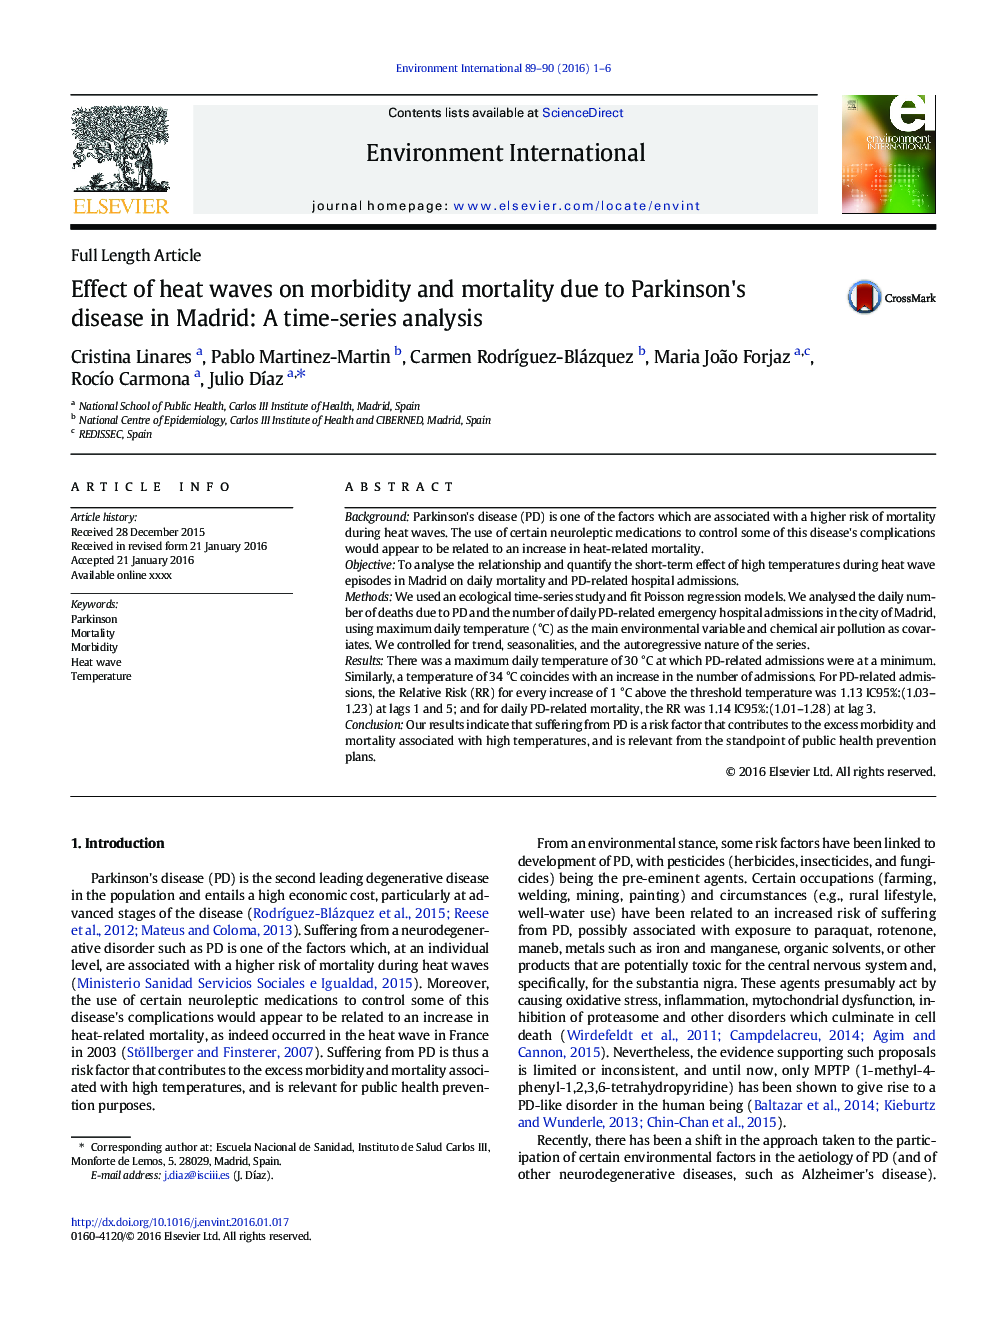 Effect of heat waves on morbidity and mortality due to Parkinson's disease in Madrid: A time-series analysis